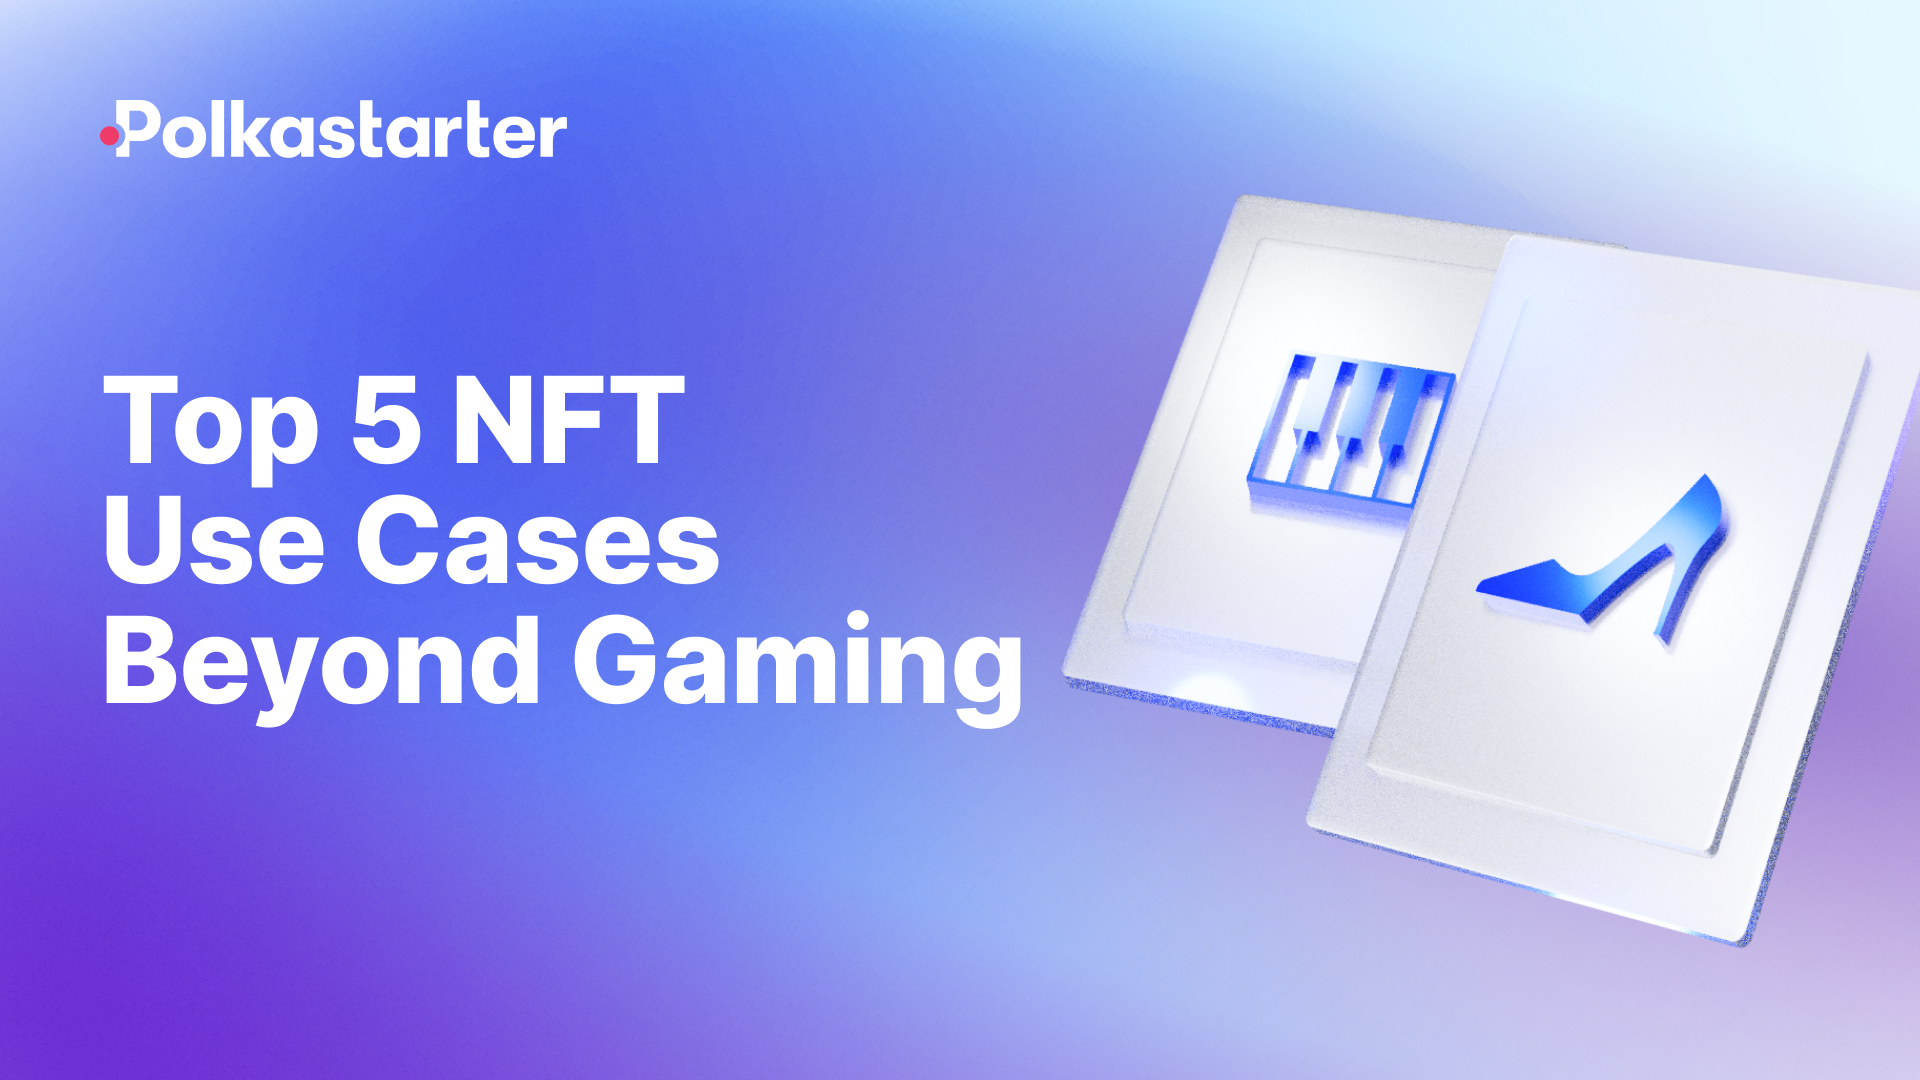 Top 5 NFT Use Cases Beyond Gaming